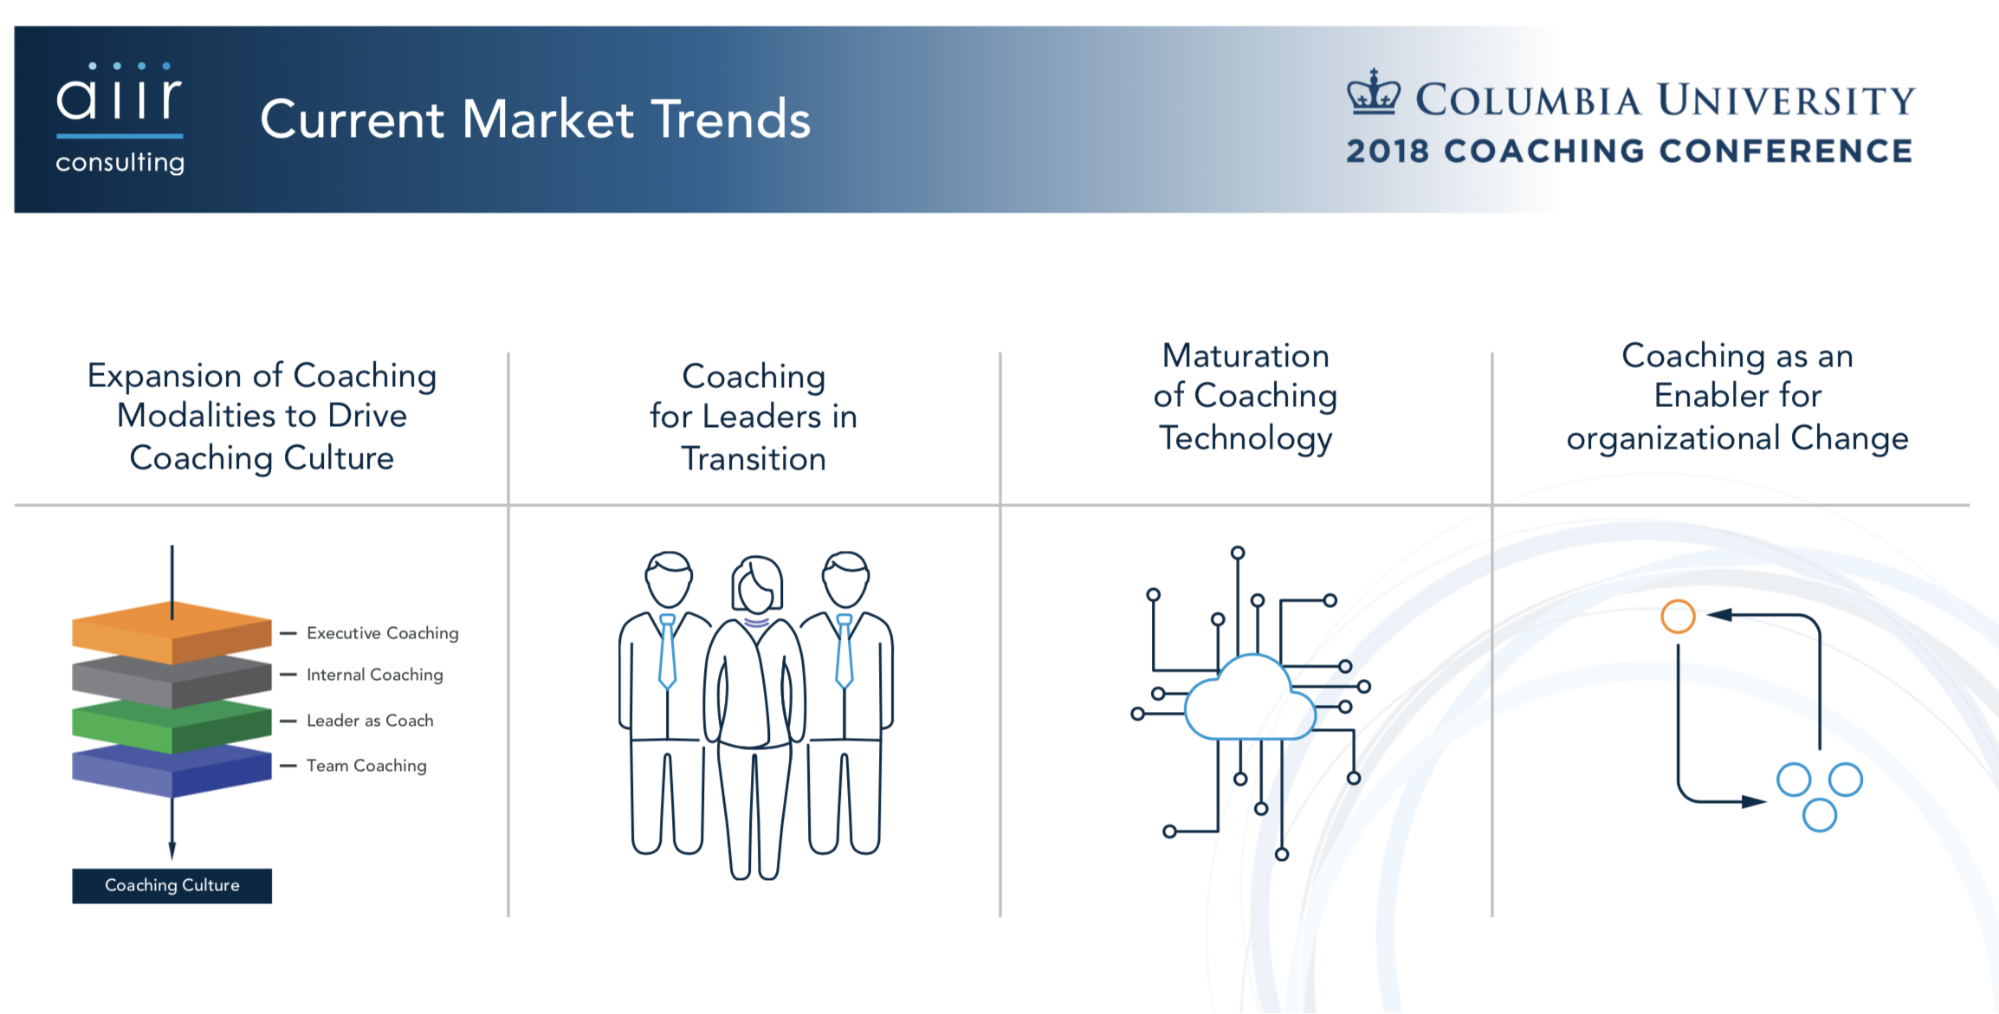 Coaching market trends for 2018-2019.